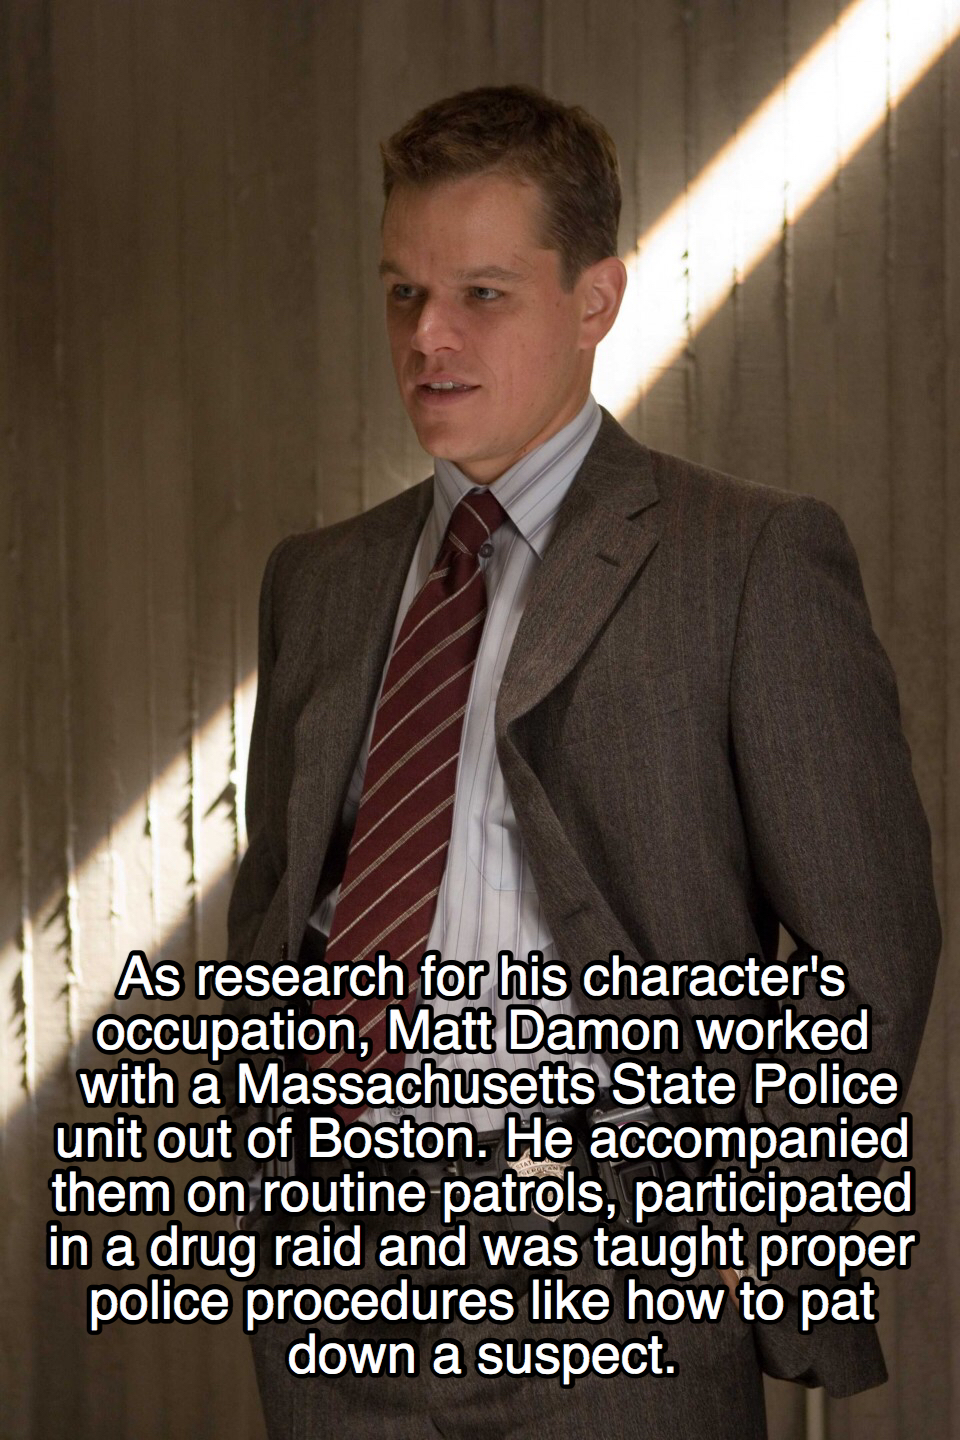 movie facts - gentleman - As research for his character's Occupation, Matt Damon worked with a Massachusetts State Police unit out of Boston. He accompanied them on routine patrols, participated in a drug raid and was taught proper police procedures how t